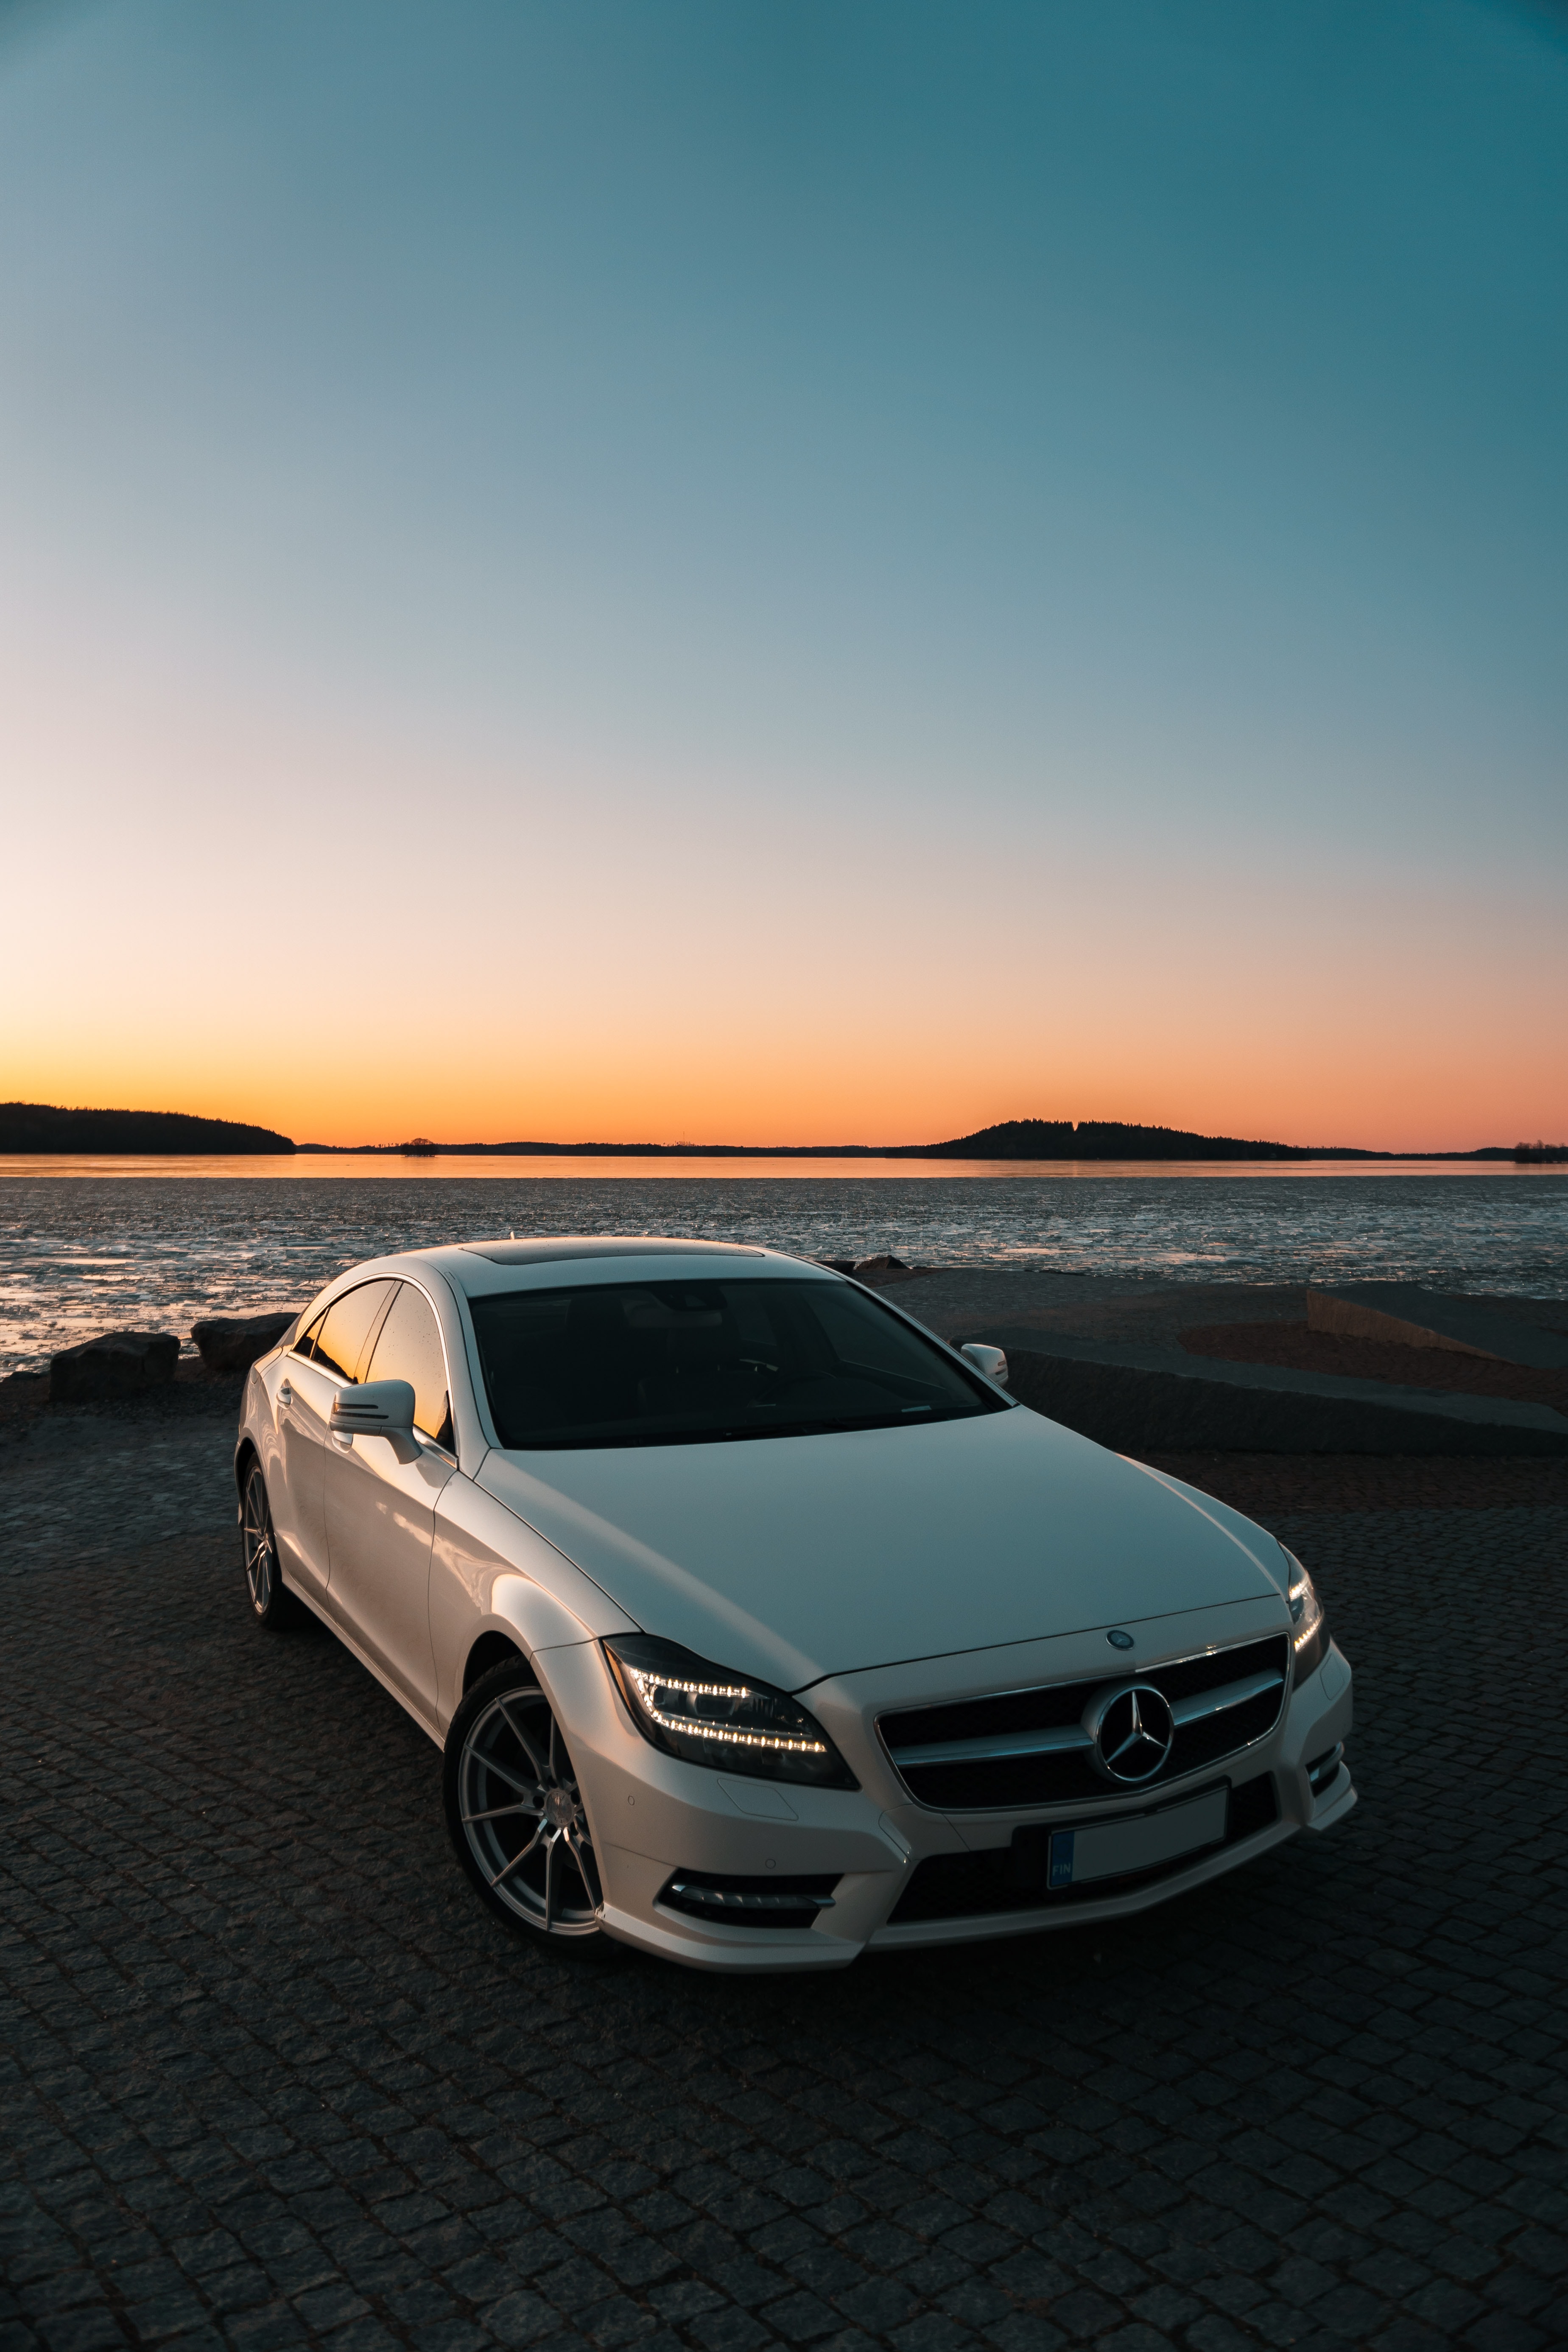 Popular Mercedes Benz Cls Image for Phone